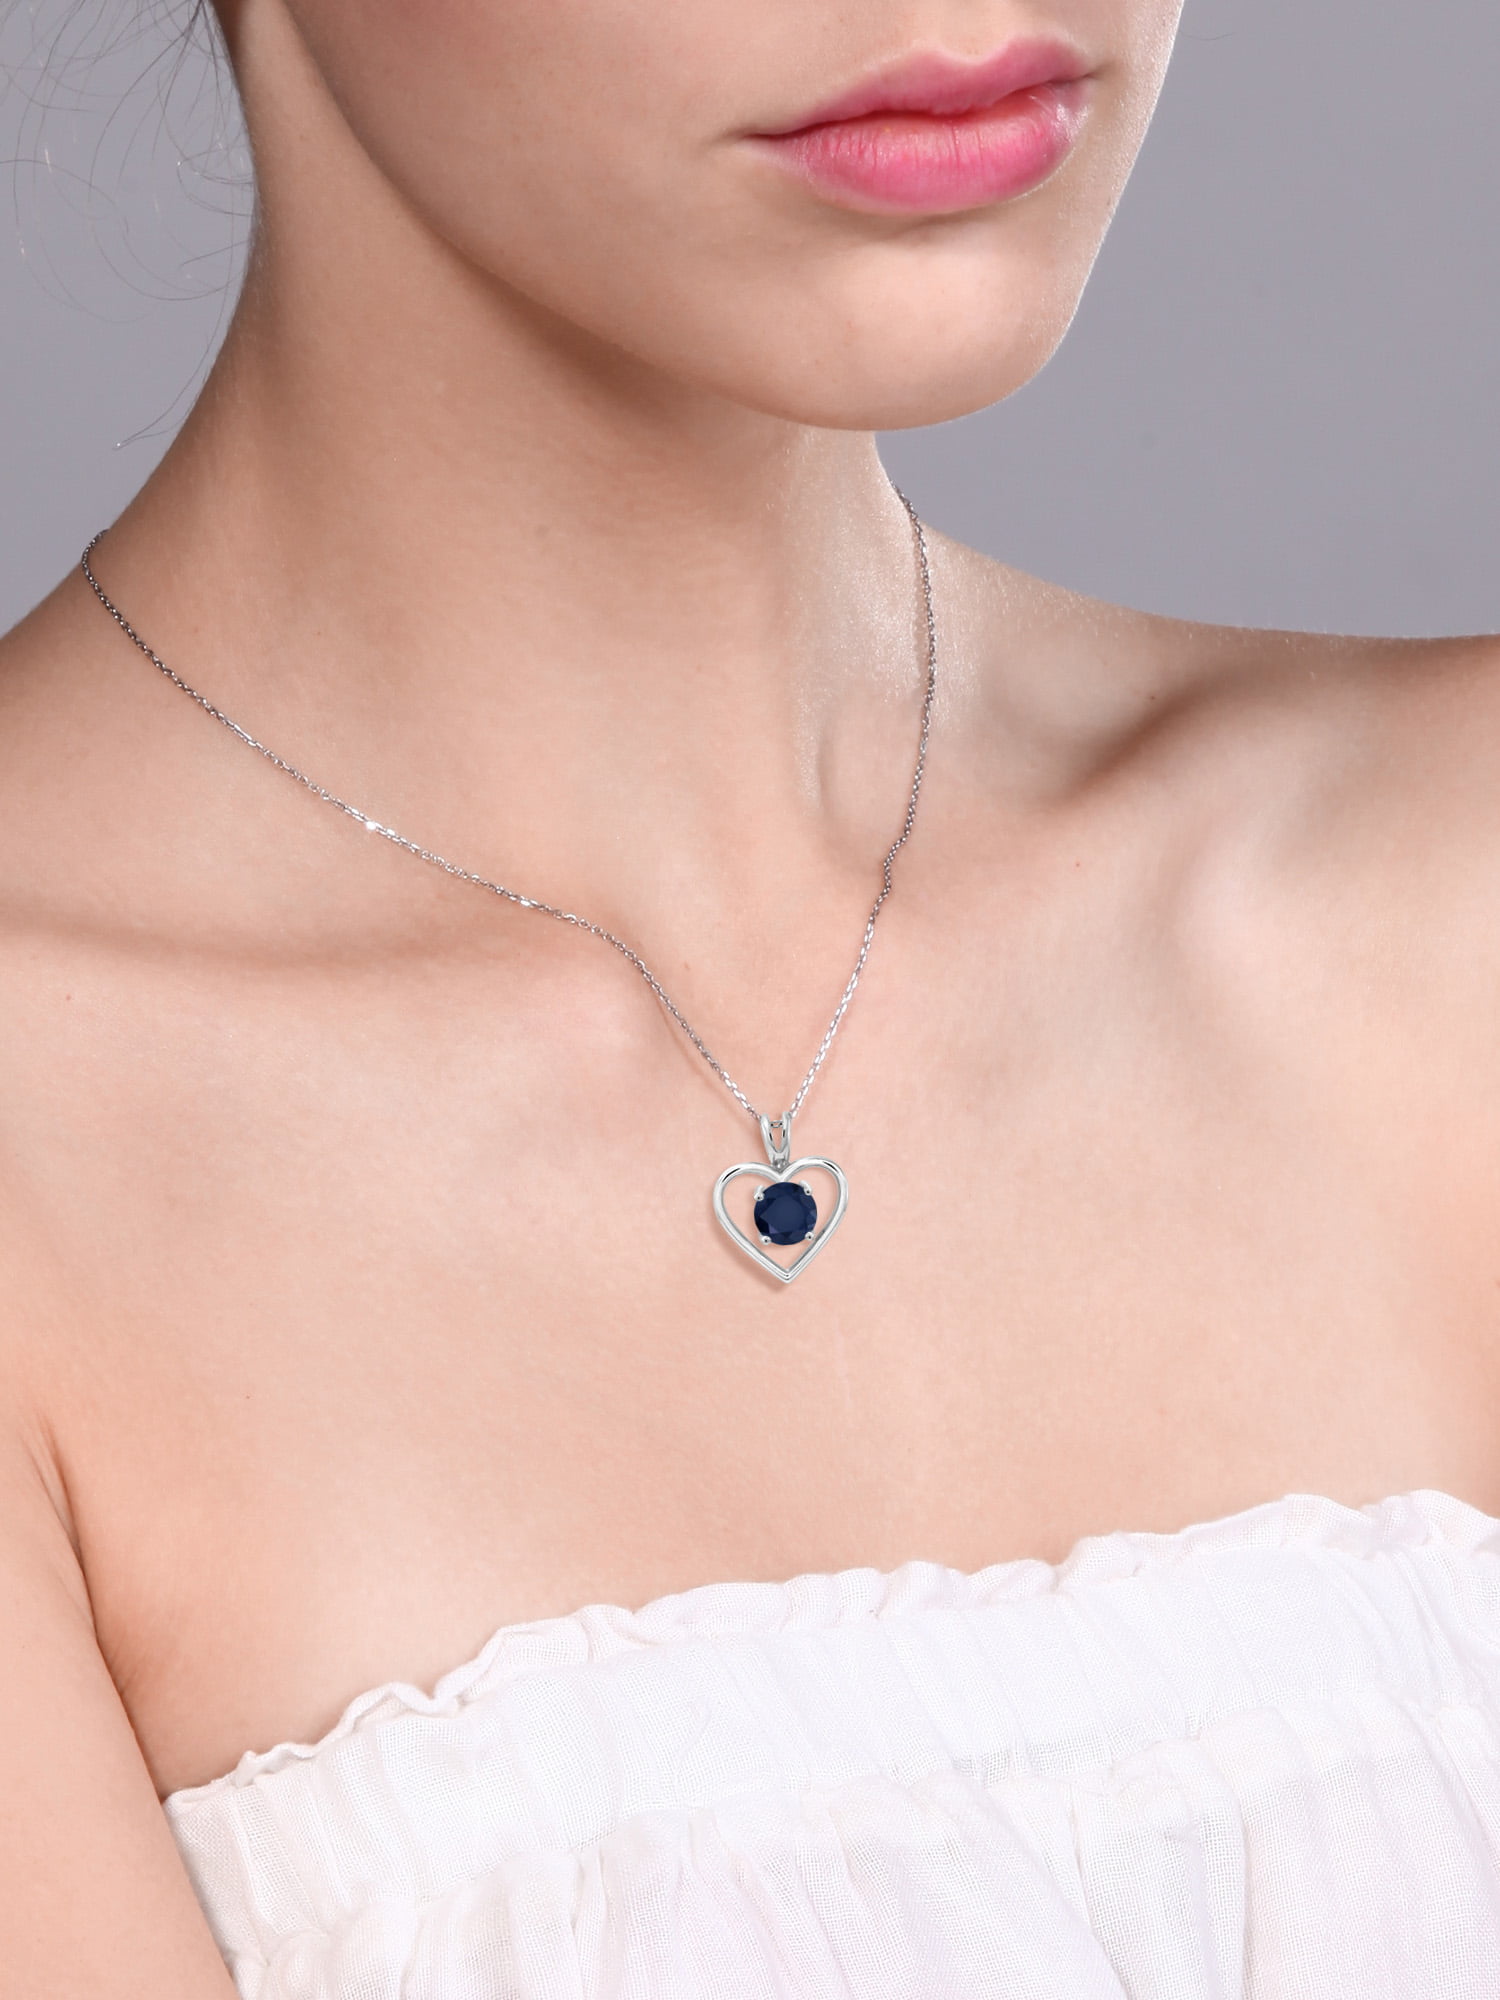 Details about   1.10 Ct Round Blue Sapphire 925 Sterling Silver Pendant With Chain 